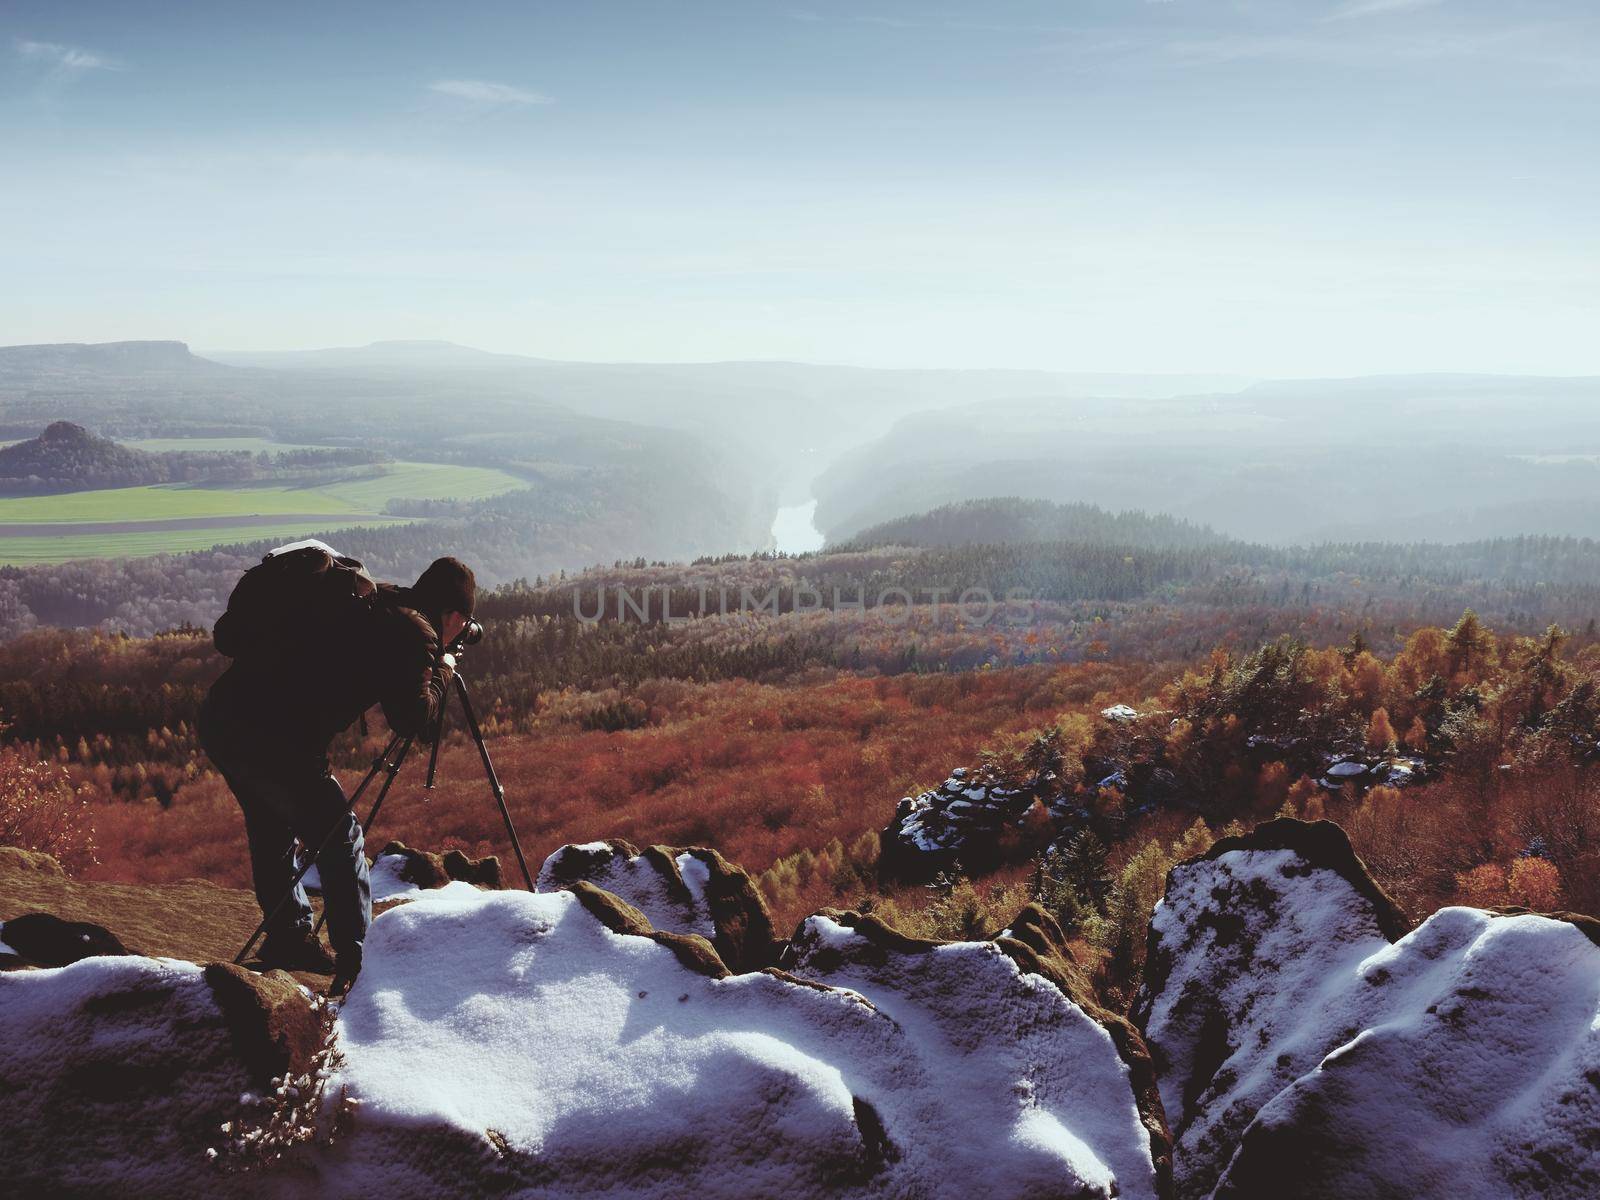 Professional photographer takes photos with mirror camera and tripod on snowy peak by rdonar2